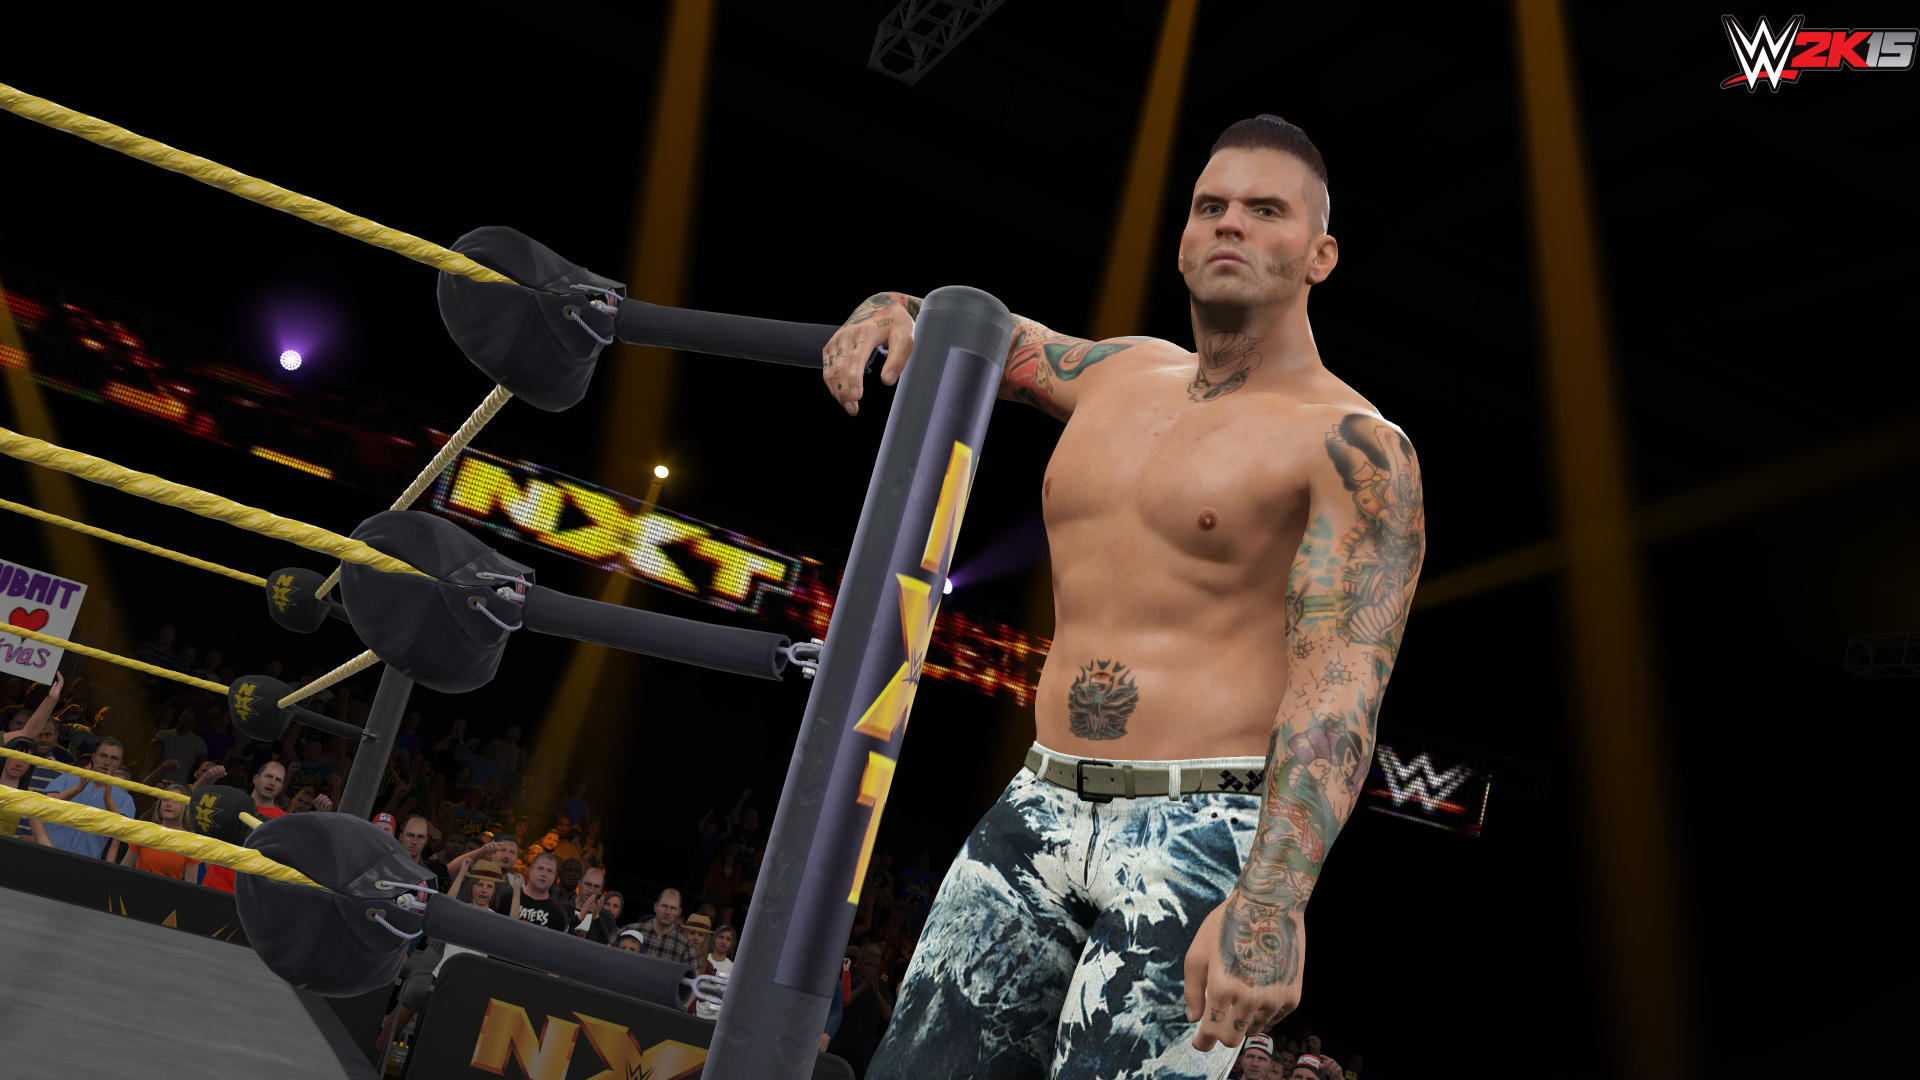 Review: WWE 2K15 (PC)